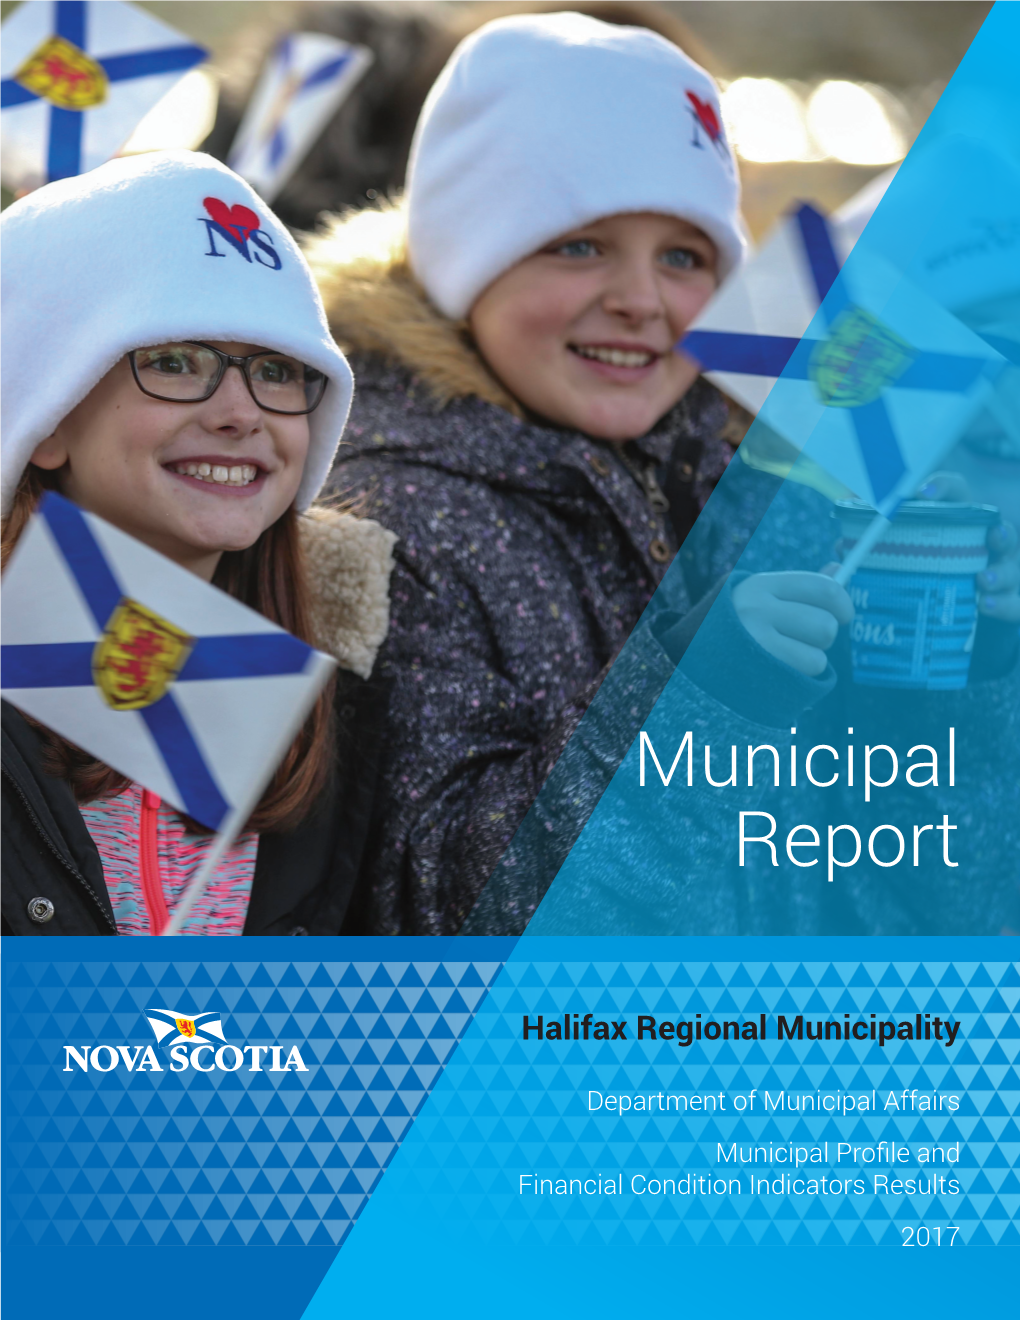 Municipal Profile and Financial Condition Indicators Results 2017